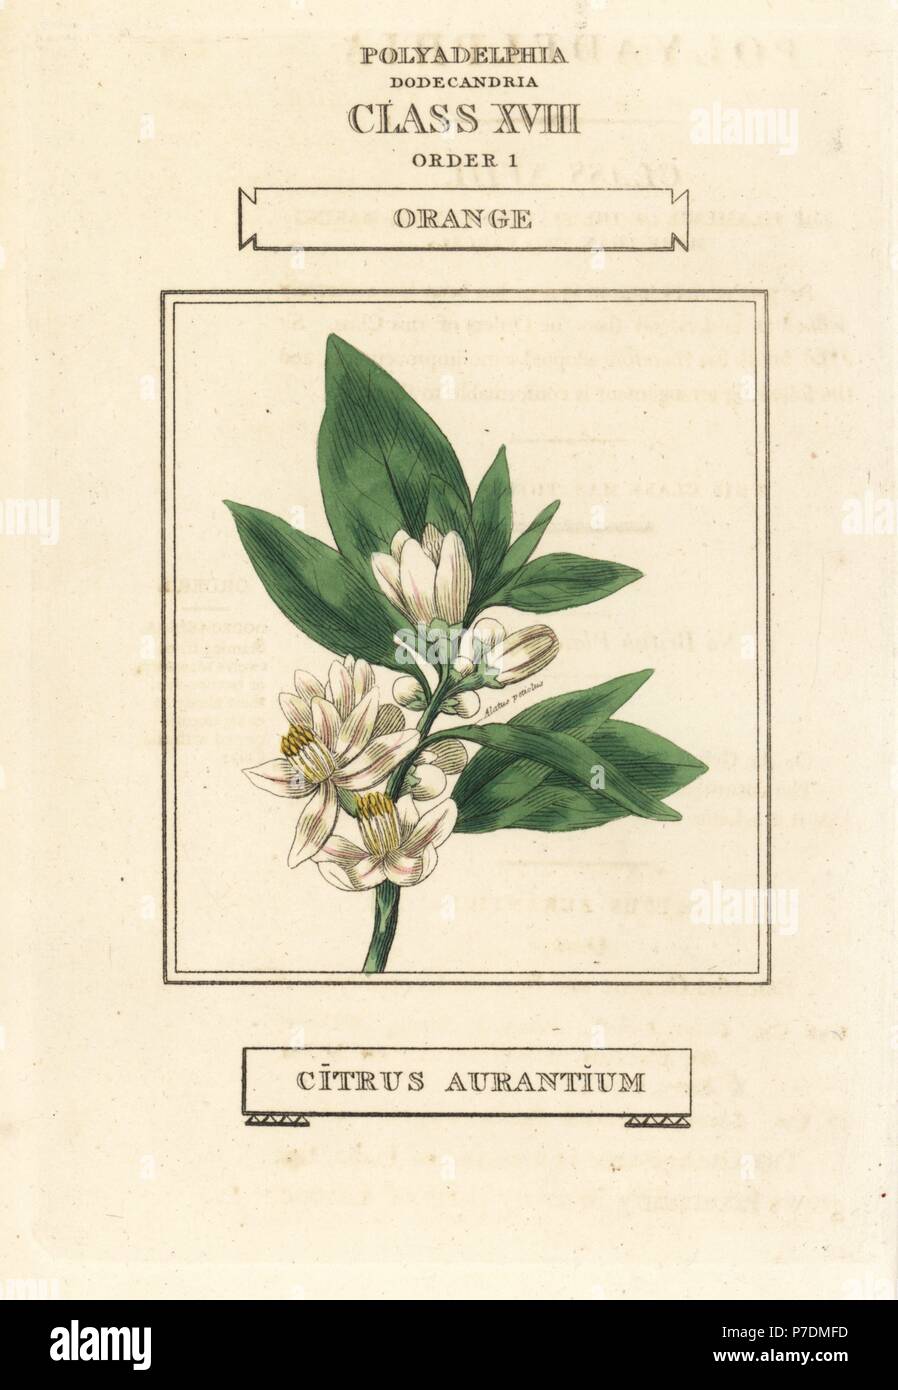 Orange tree, Citrus aurantium. Handcoloured copperplate engraving after an illustration by Richard Duppa from his The Classes and Orders of the Linnaean System of Botany, Longman, Hurst, London, 1816. Stock Photo